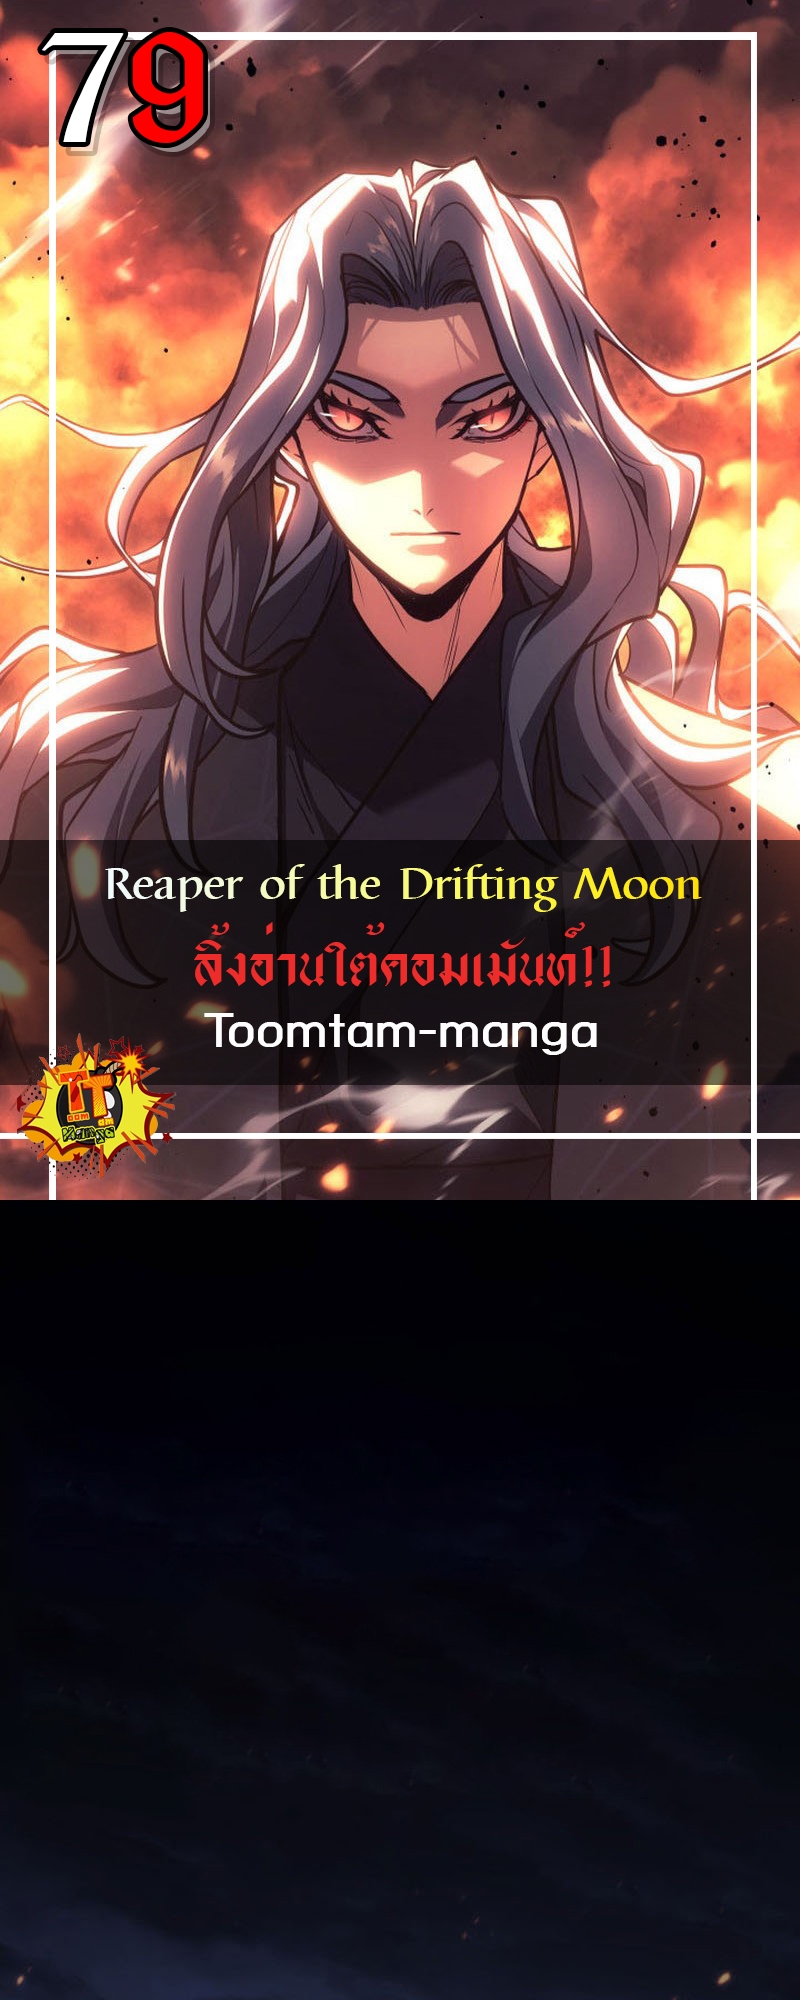 Reaper of the Drifting Moon 79 14 3 25670001